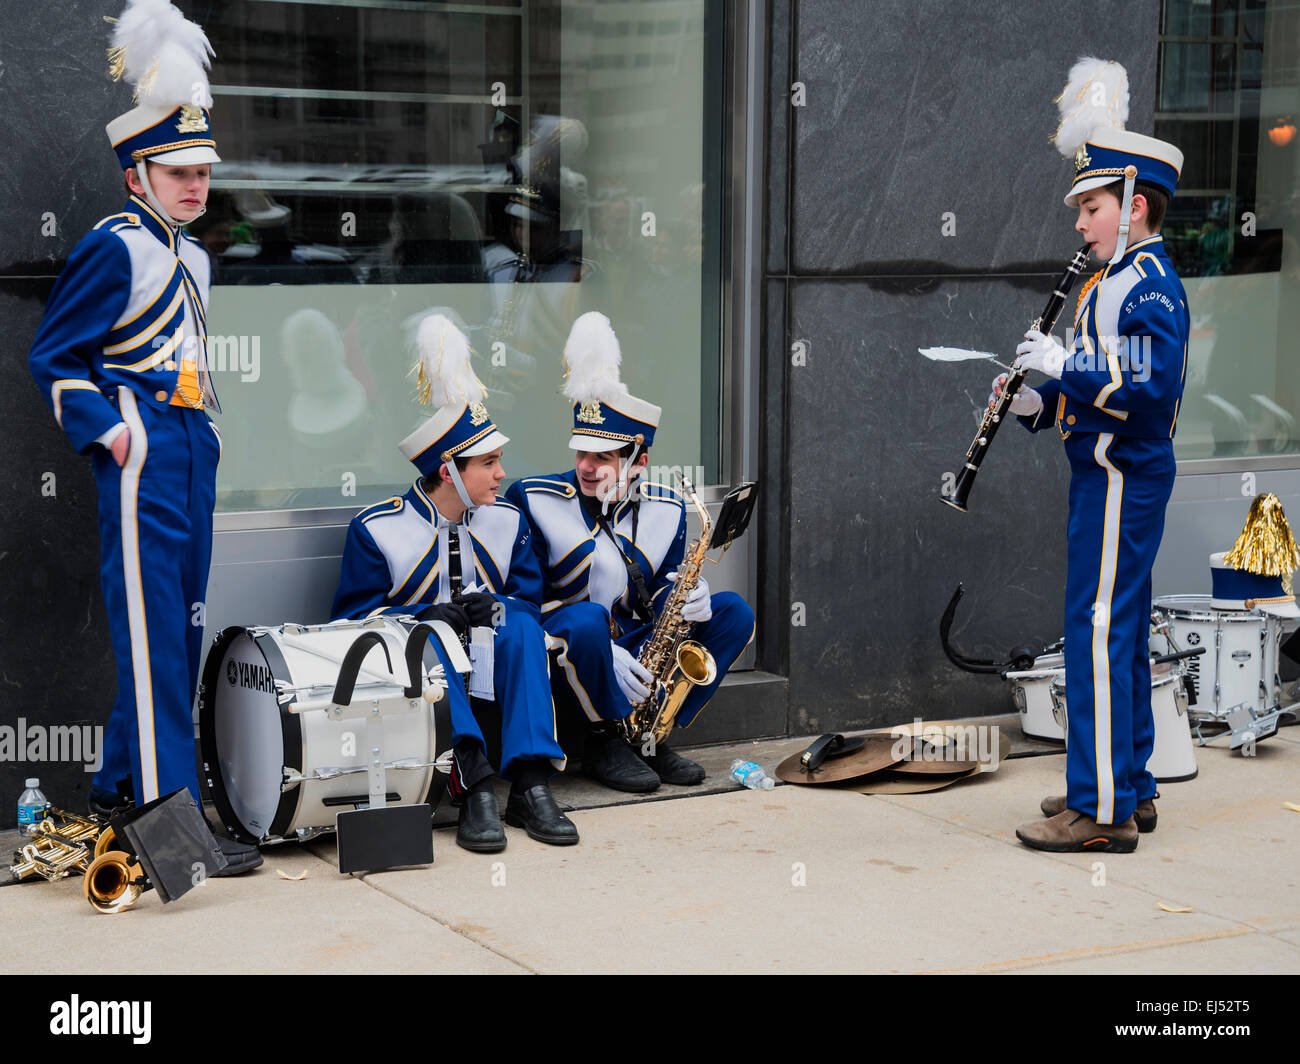 Four young musicians in bright blue and white suits in anticipation of the parade,St. Patrick's Day Parade, Philadelphia, US Stock Photo